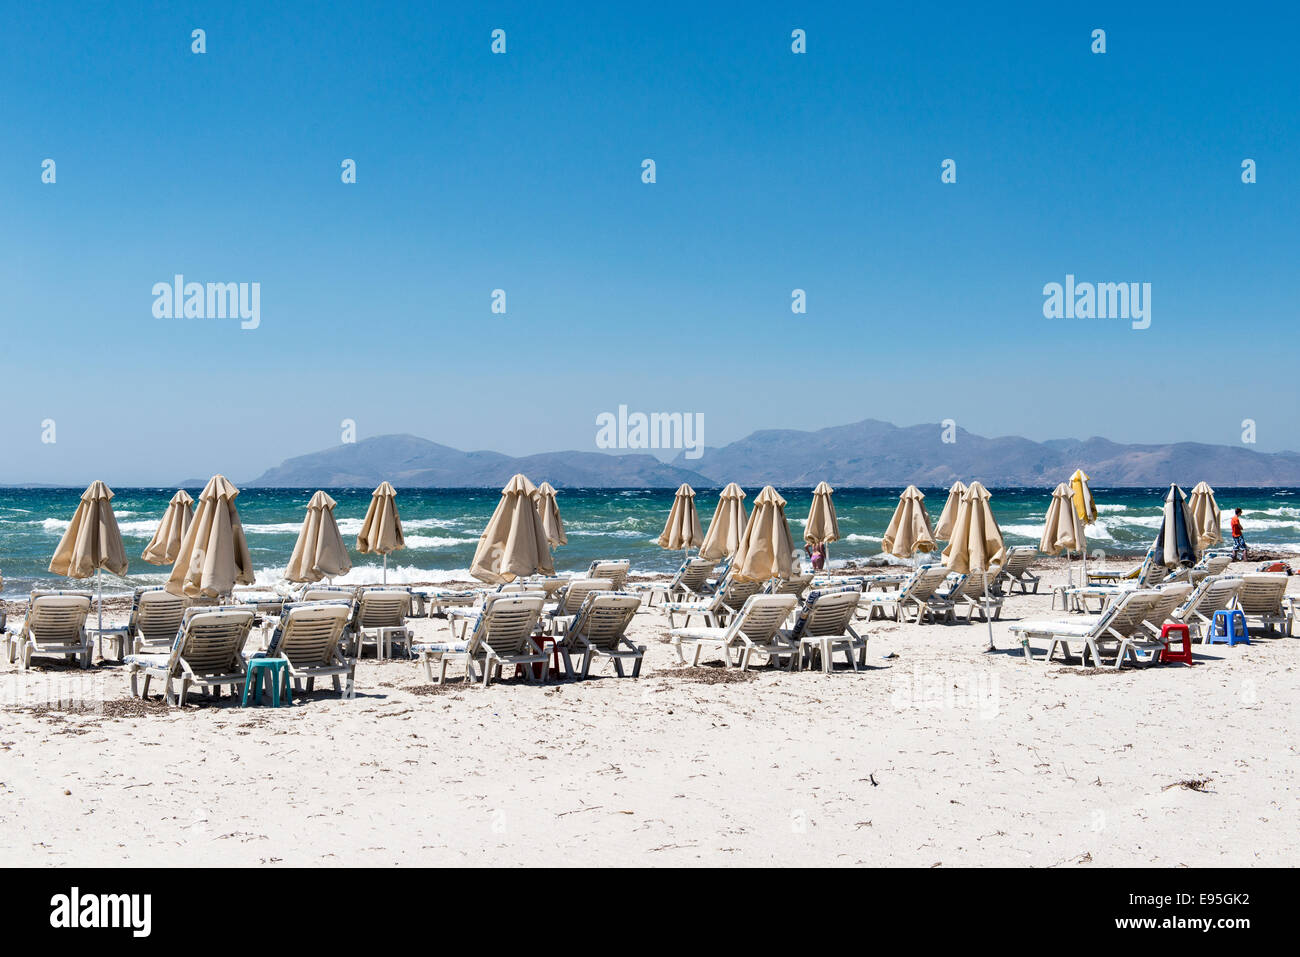 Empty beach with closed parasols and sun loungers on the beach of Mastichari, island of Kos, Greece Stock Photo